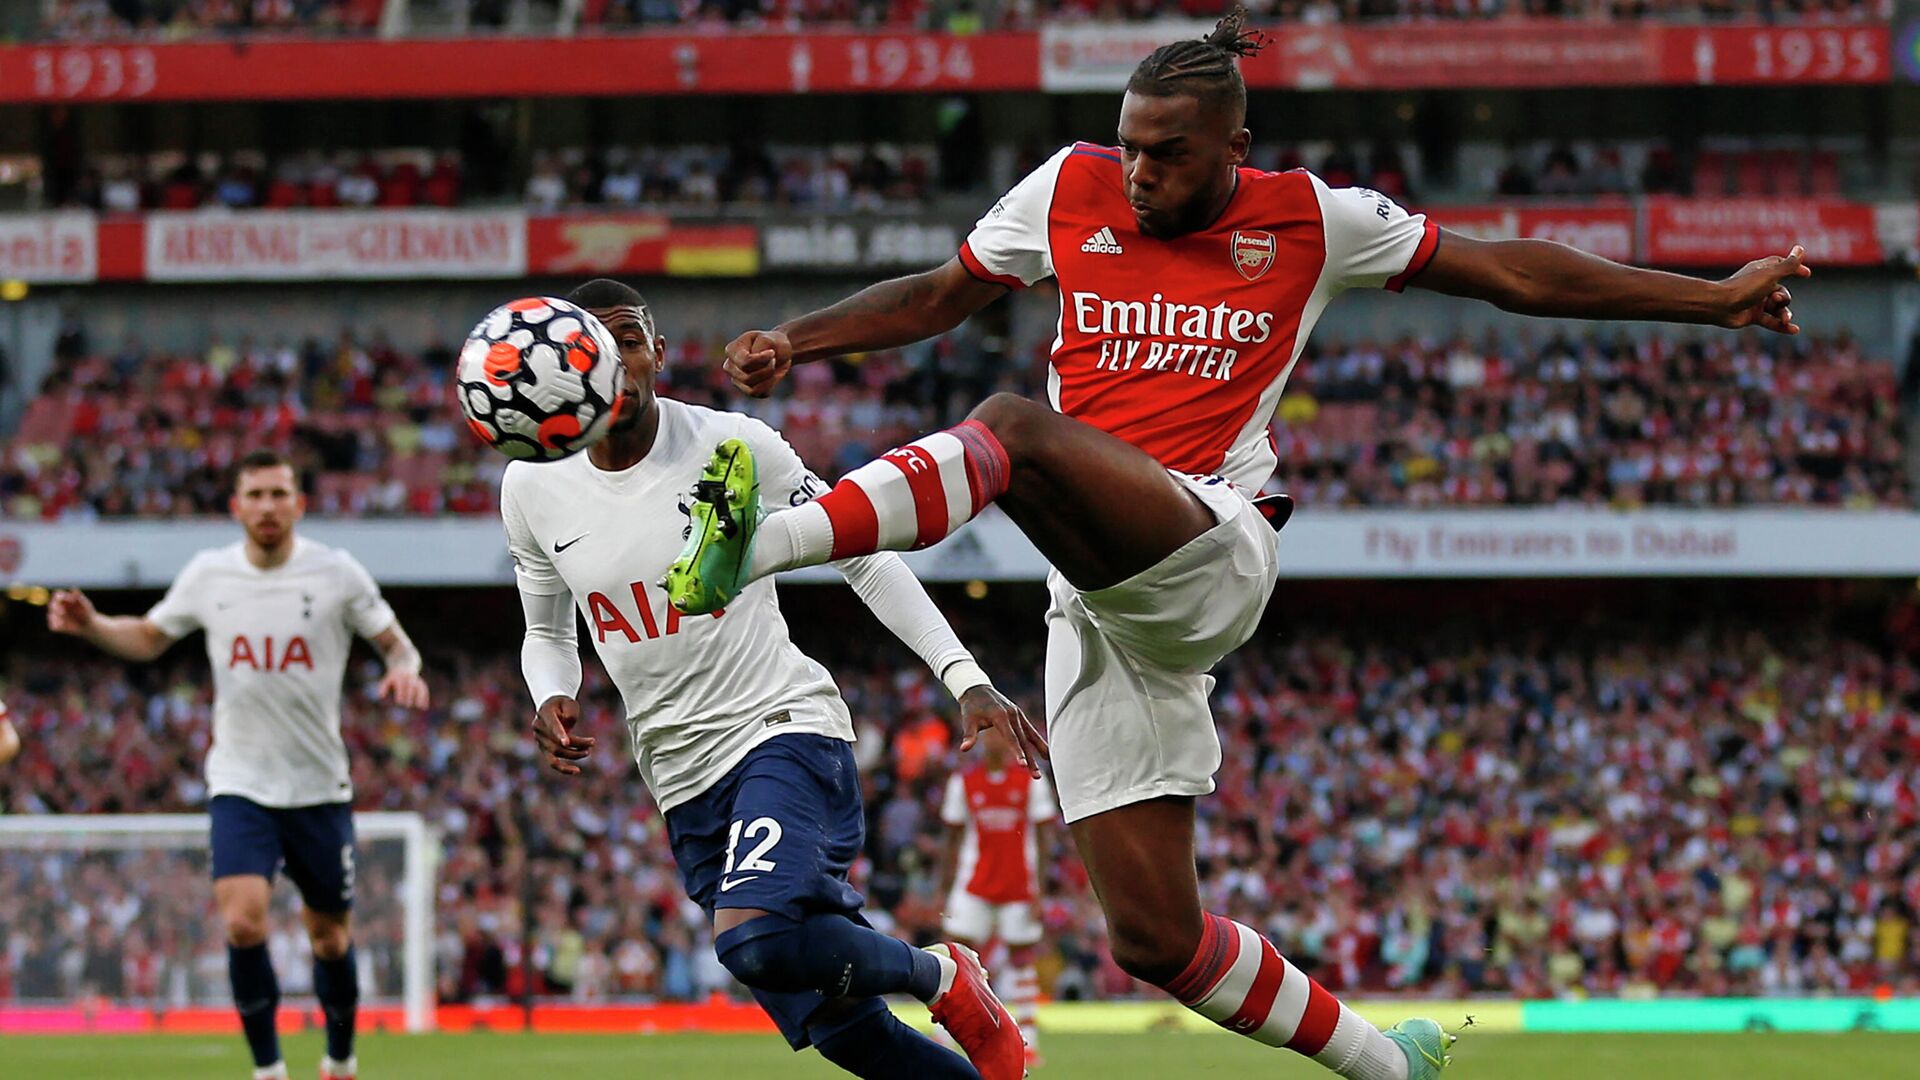 Arsenal's Portuguese defender Nuno Tavares (R) crosses the ball during the English Premier League football match between Arsenal and Tottenham Hotspur at the Emirates Stadium in London on September 26, 2021. (Photo by Ian KINGTON / IKIMAGES / AFP) / RESTRICTED TO EDITORIAL USE. No use with unauthorized audio, video, data, fixture lists, club/league logos or 'live' services. Online in-match use limited to 45 images, no video emulation. No use in betting, games or single club/league/player publications. - РИА Новости, 1920, 15.01.2022